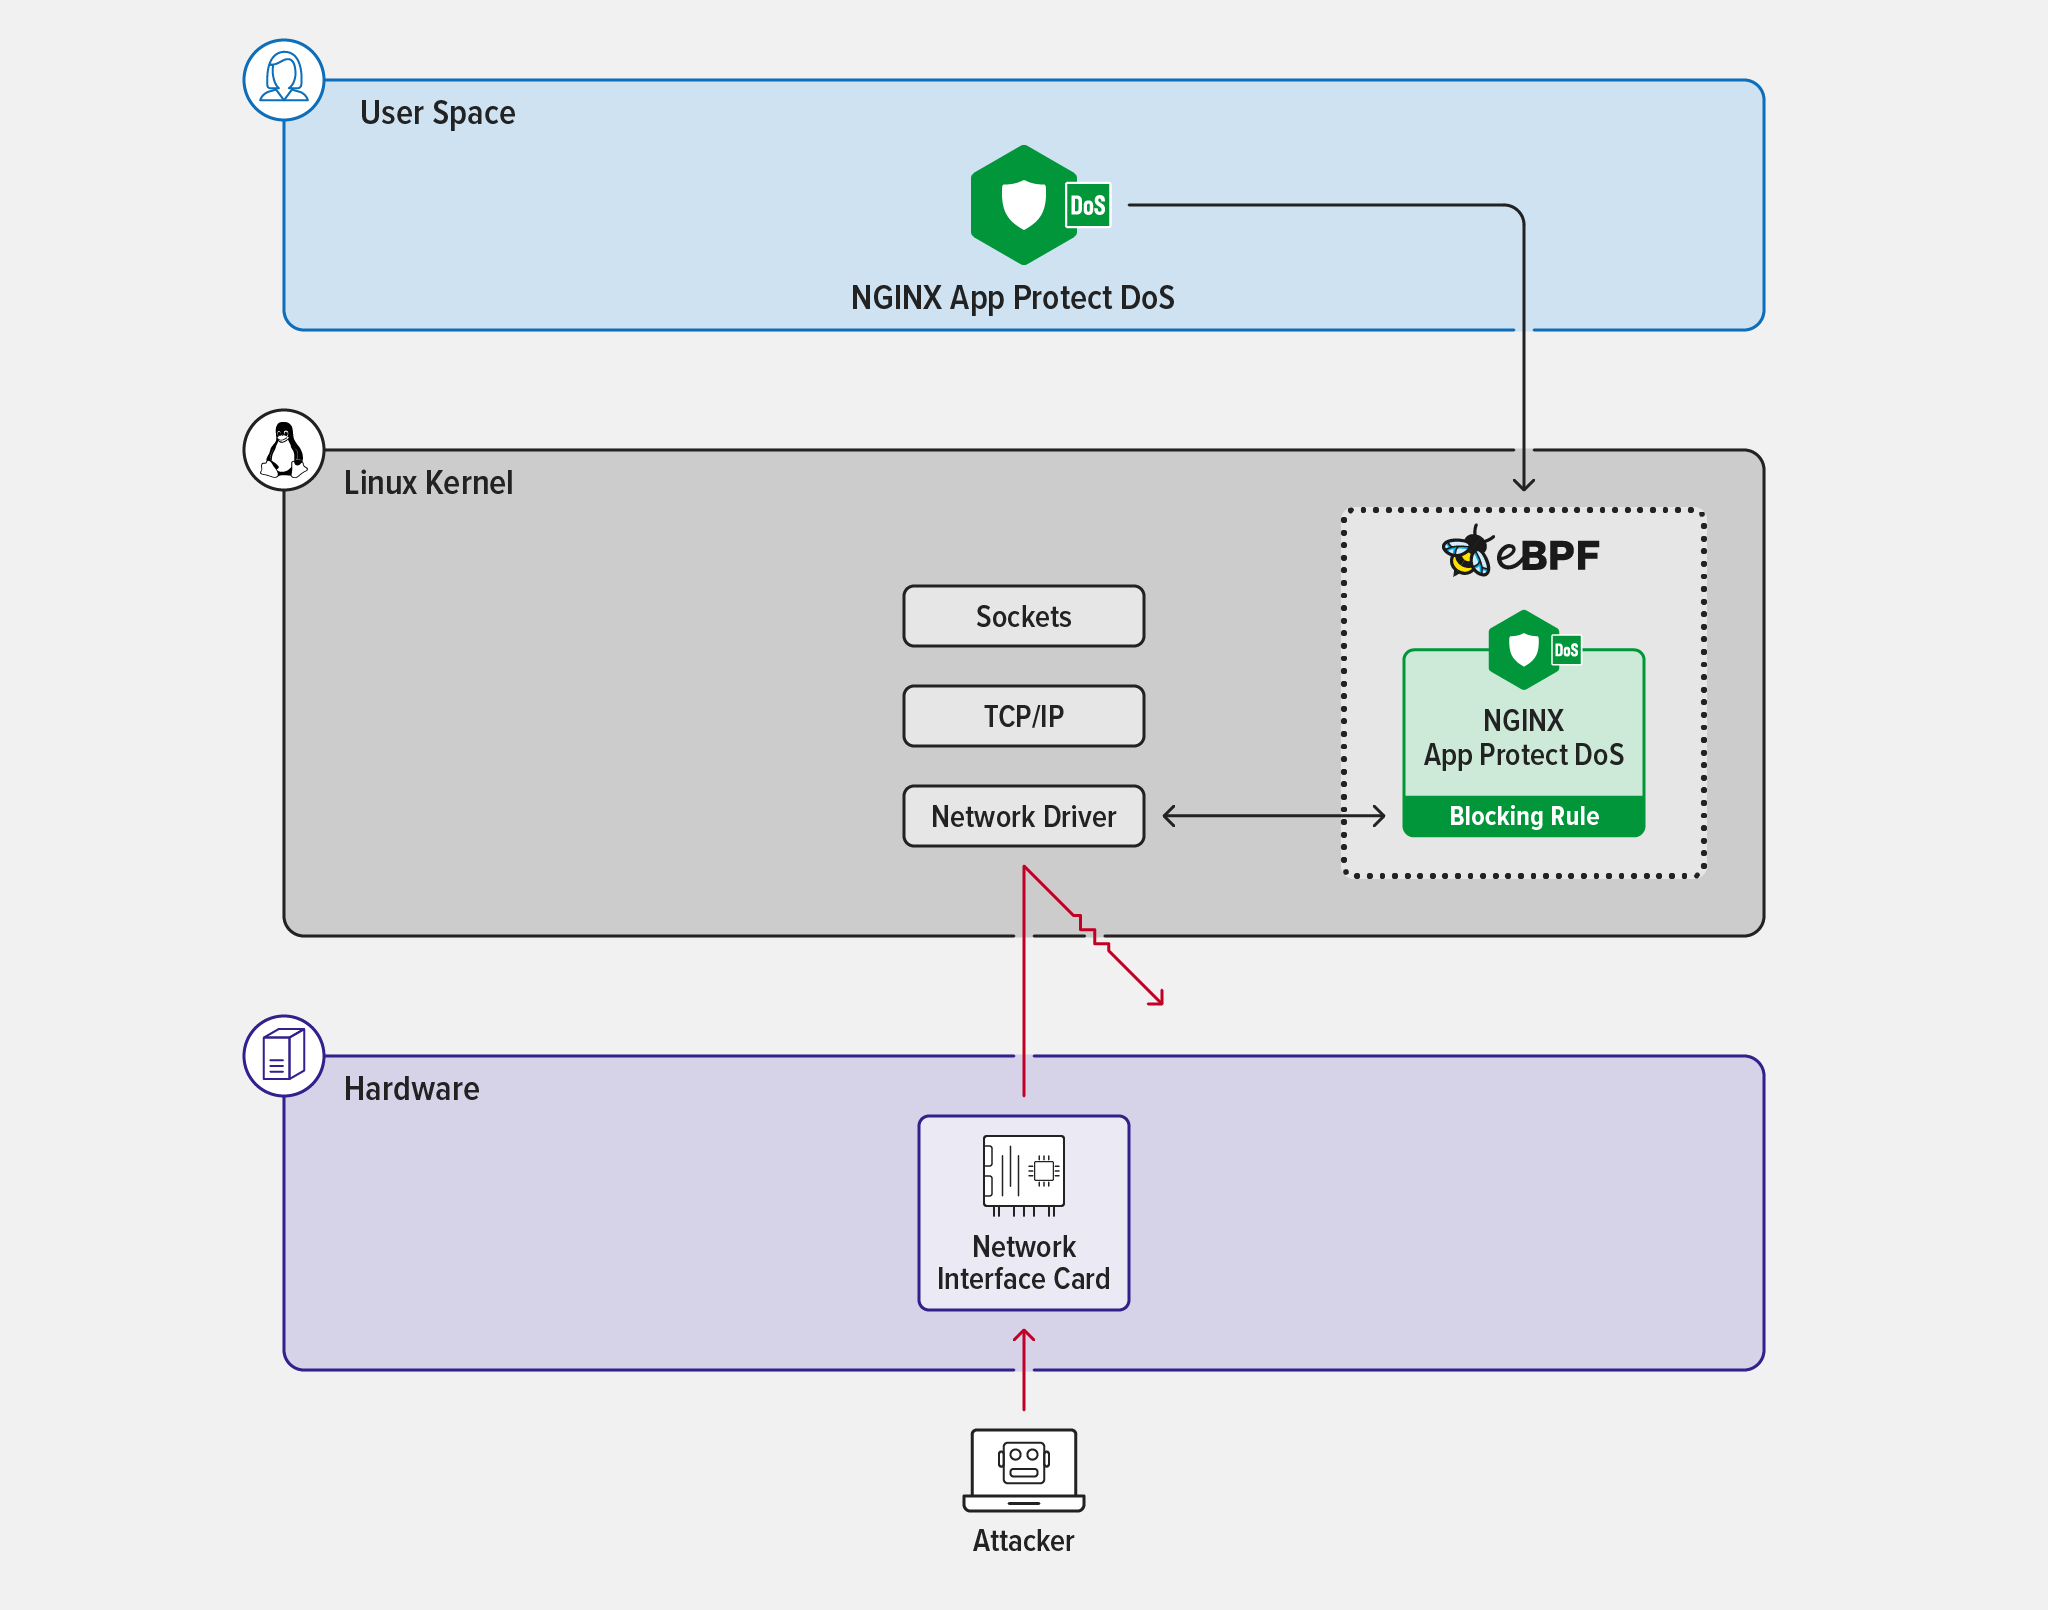 Diagram showing how NGINX App Protect DoS invokes an eBPF-encoded rule in the kernel to repel an attacker